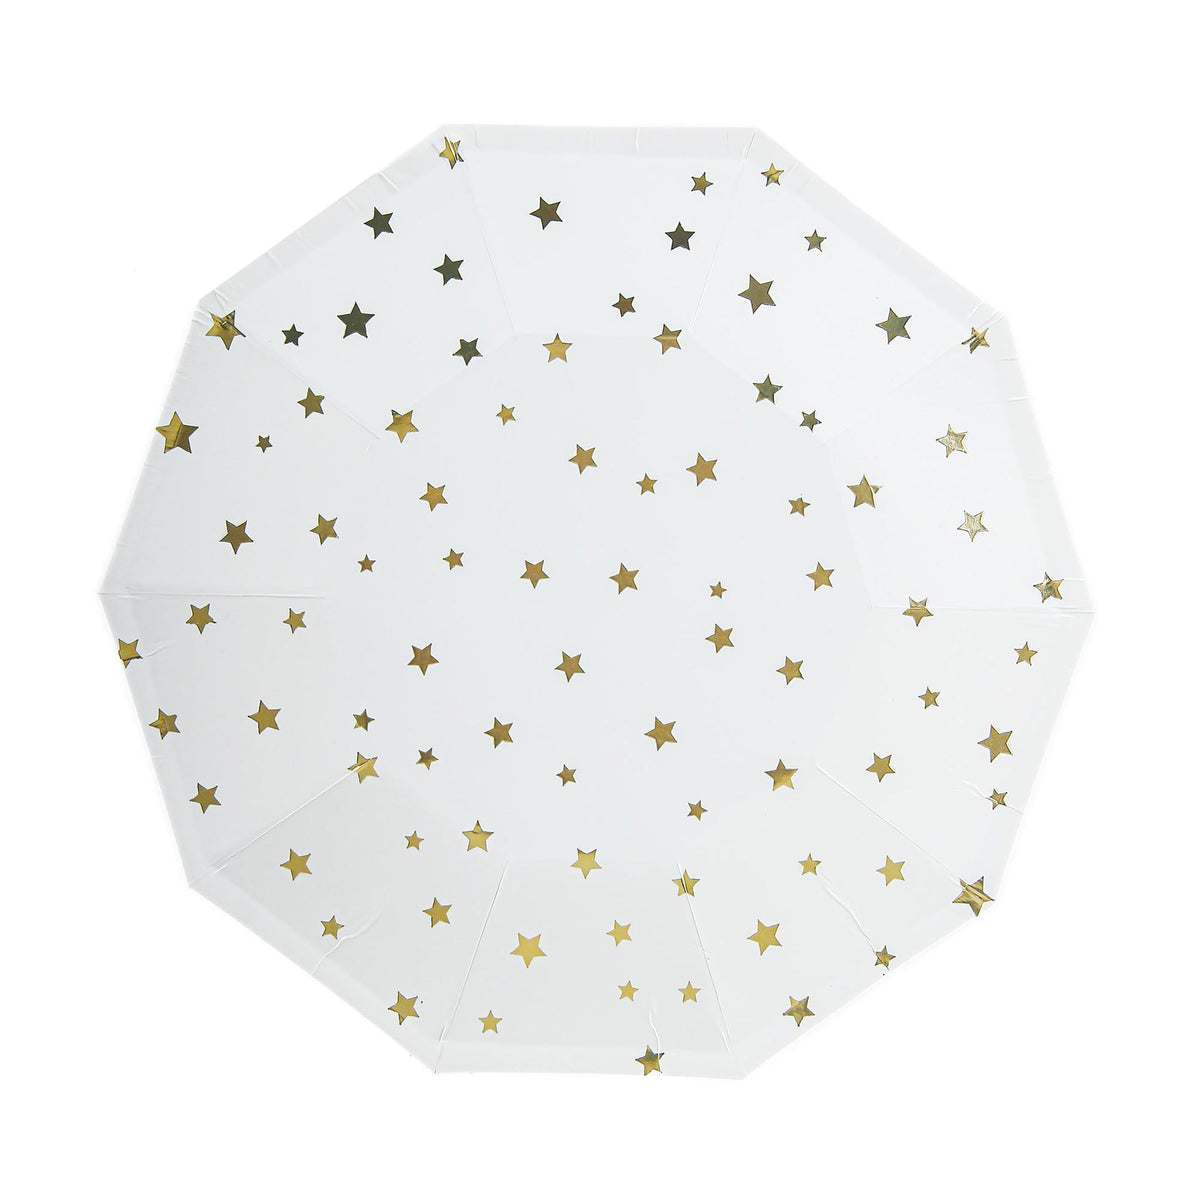 YIWU SANDY PAPER PRODUCTS CO., LTD Everyday Entertaining Little Stars Small Decagon Dessert Paper Plates, Gold, 7 Inches, 8 Count 810120713144